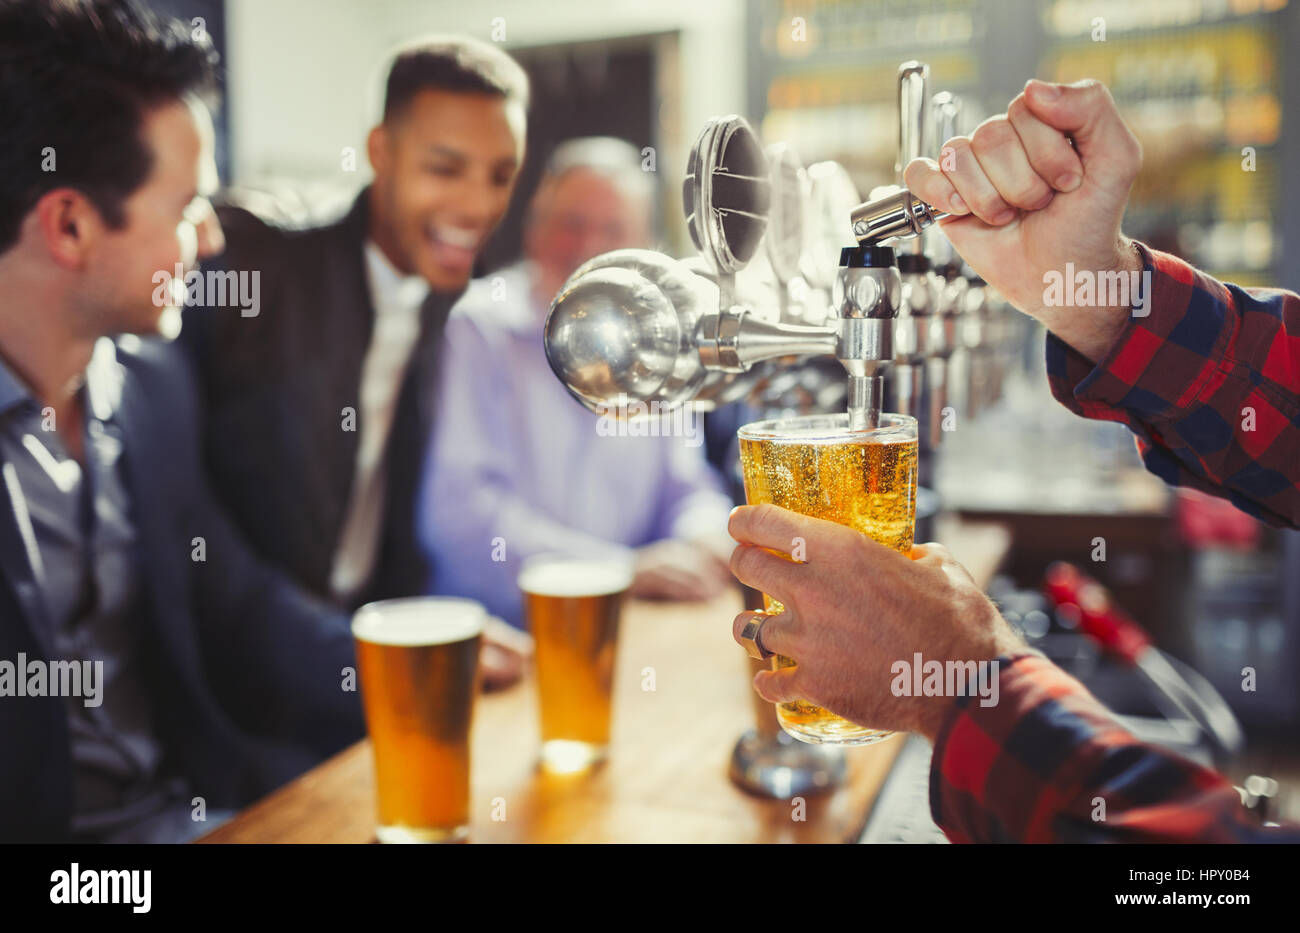 Bartender pouring beer from tap behind bar Stock Photo